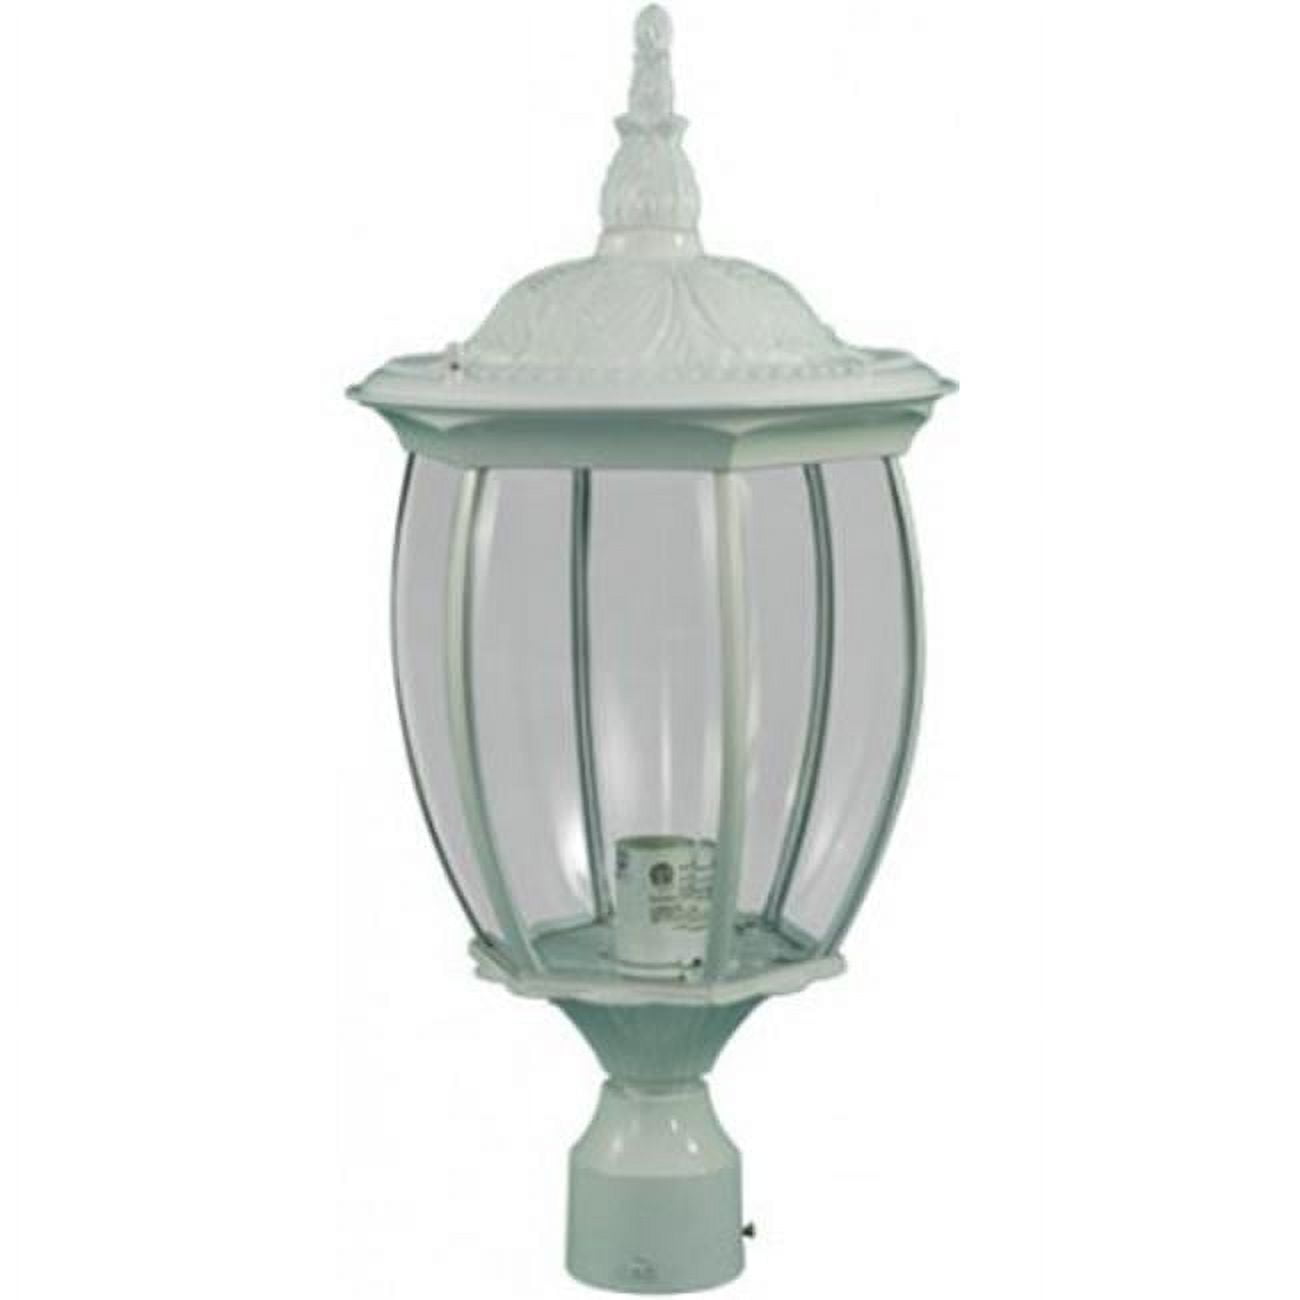 Picture of Dabmar Lighting GM102-LED16-W 16W & 85-265V LED Victoria Post Top Light Fixture - White